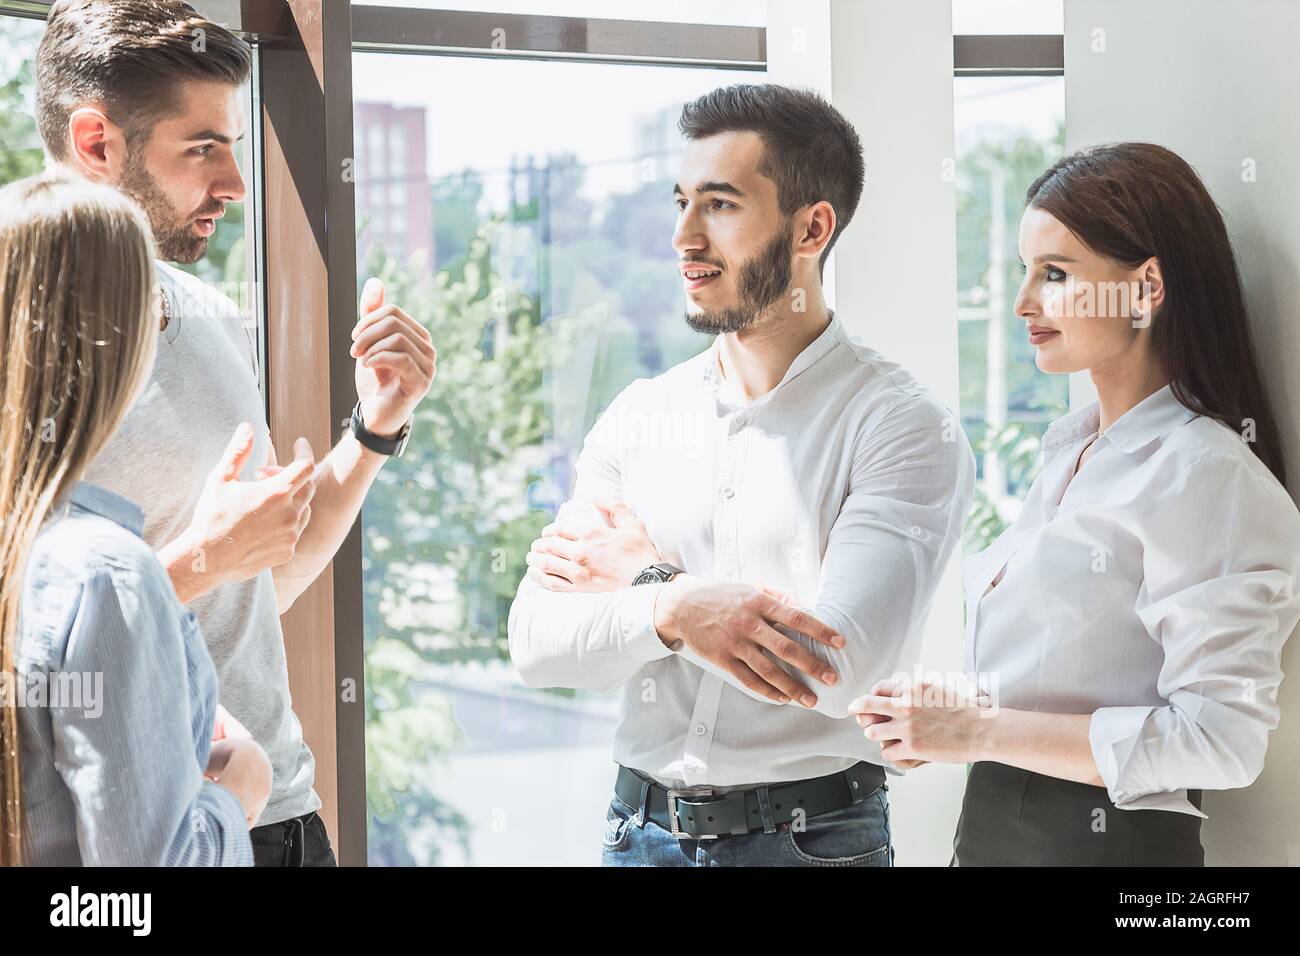 Young students discuss the topic of a lecture in between classes Stock Photo